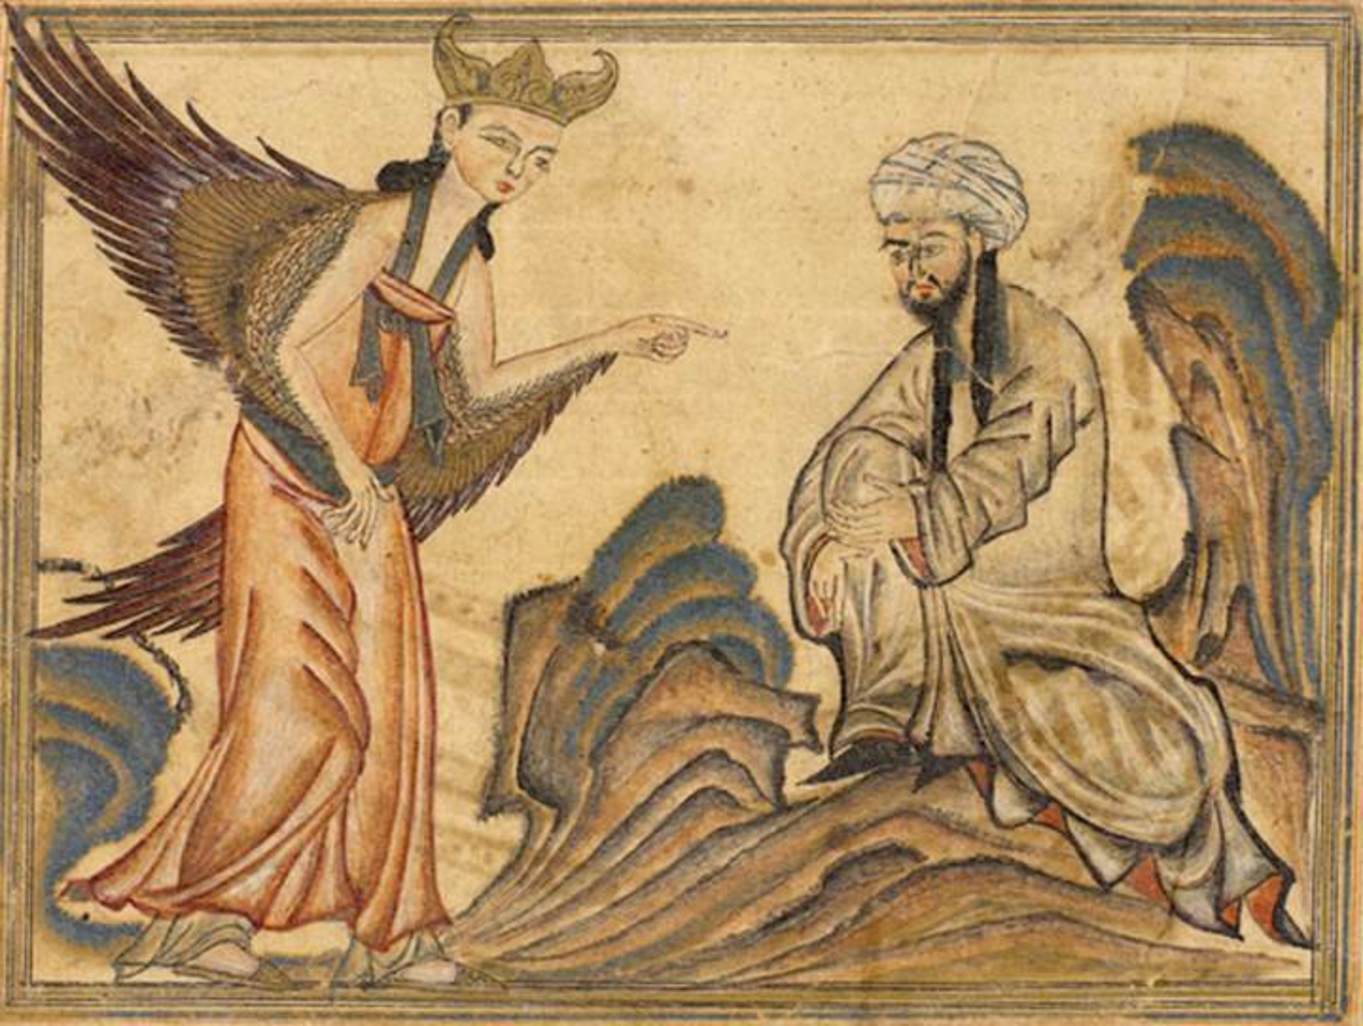 illustration of Mohammed and the Angel Gabriel